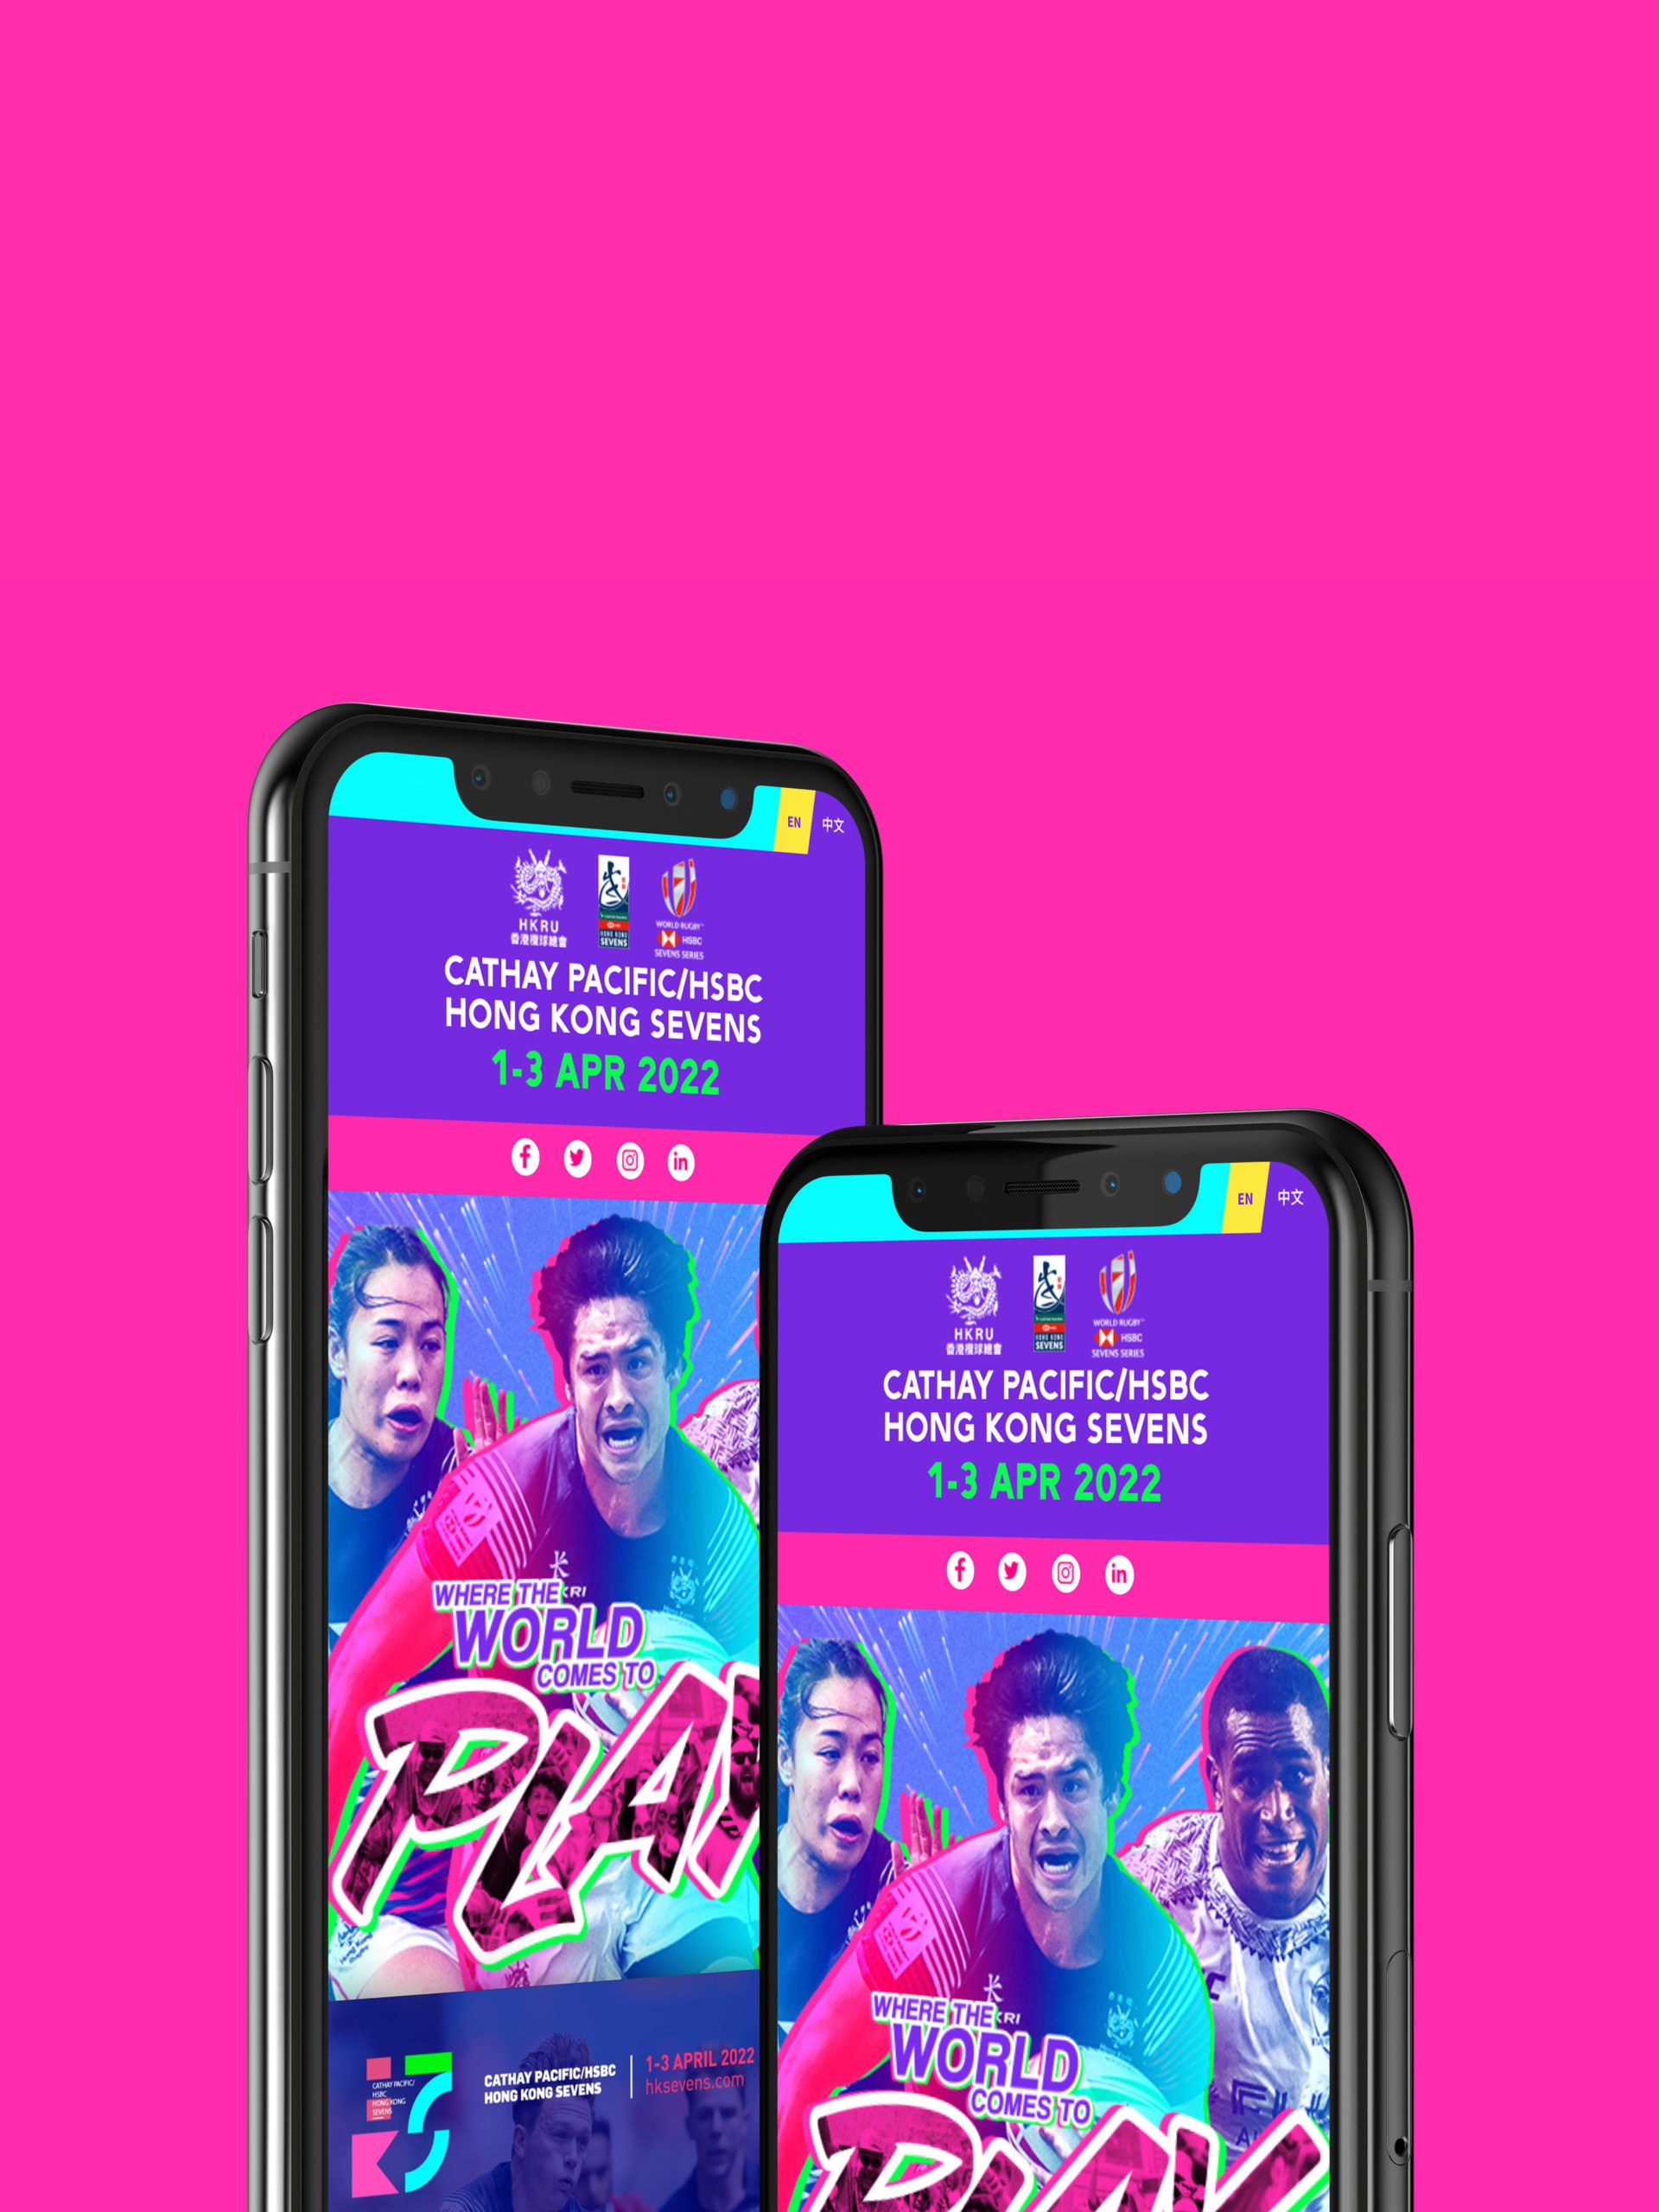 Hong Kong Seven website shown on phones with neon pink background